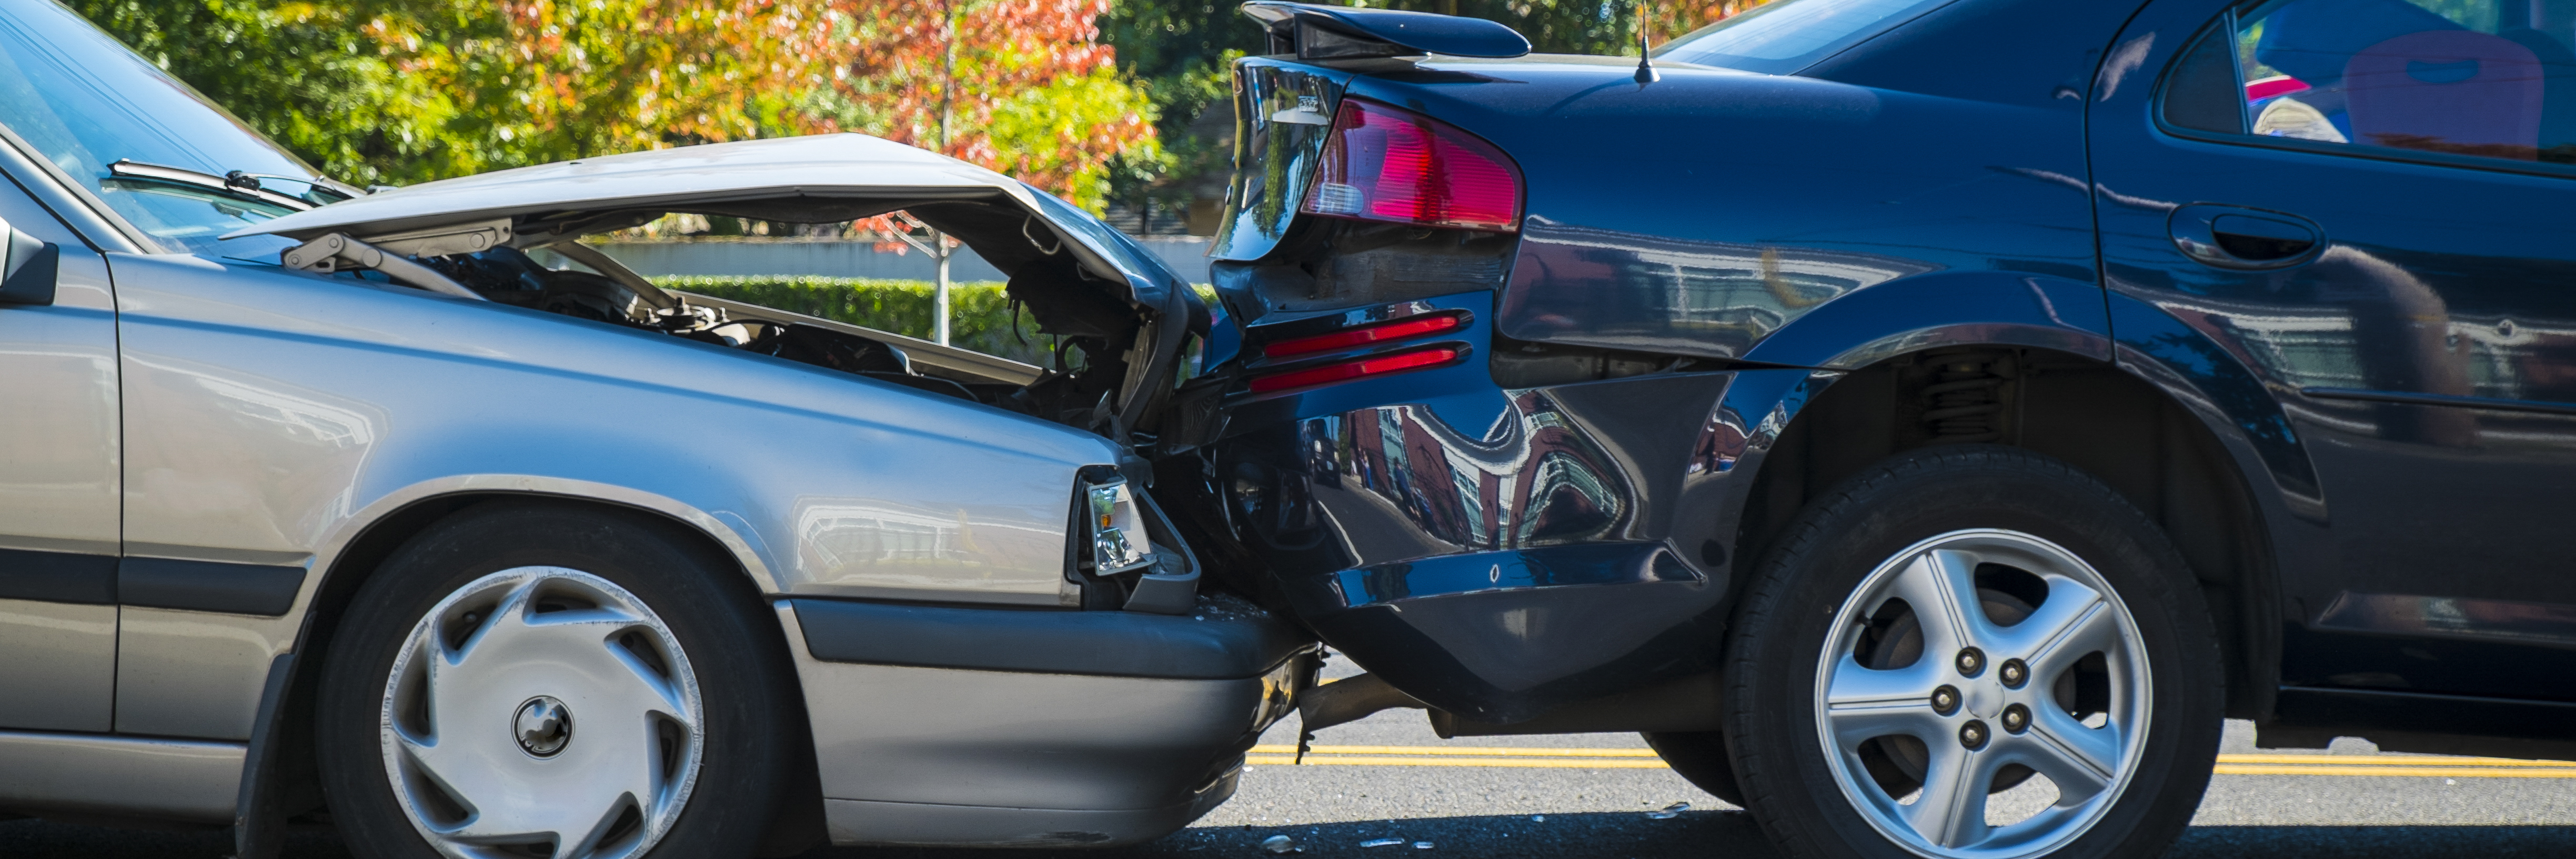 Milwaukee car accident laws from personal injury attorneys